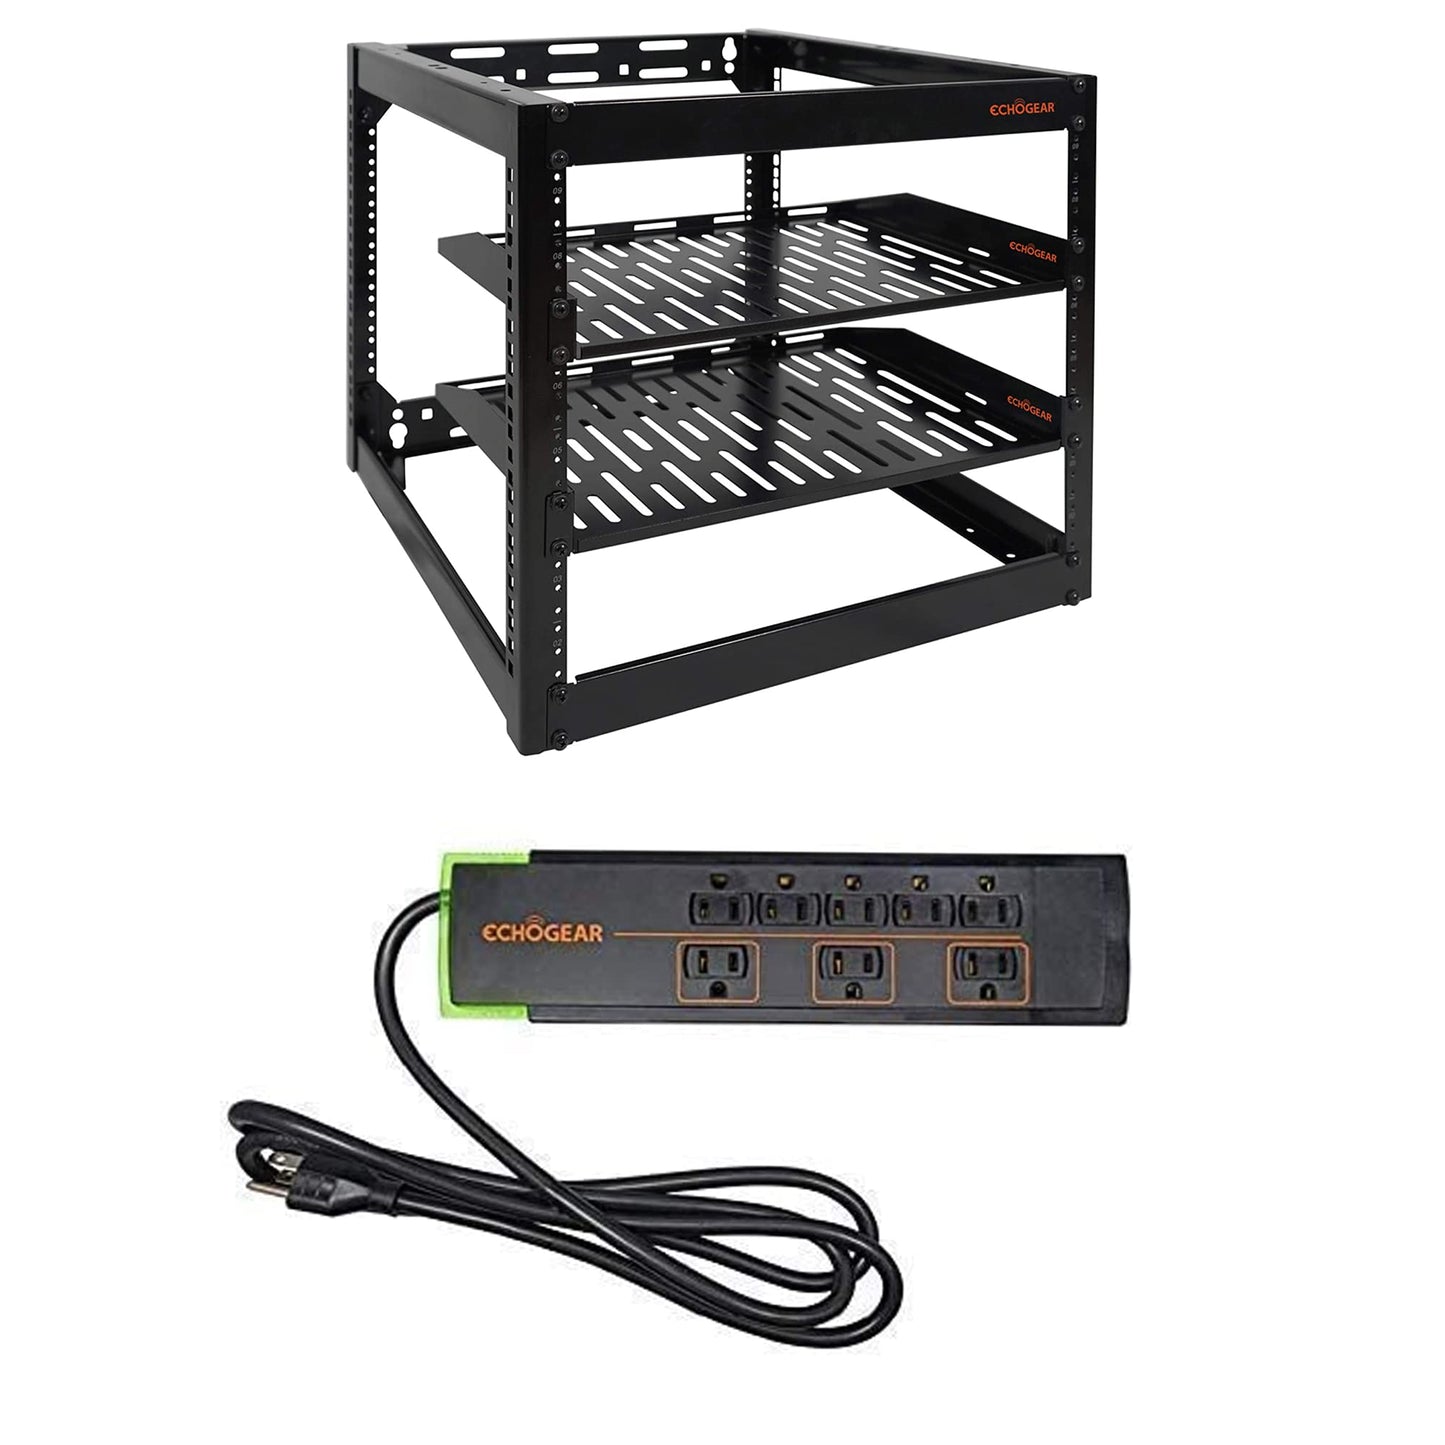 10U Open Frame Rack with 8 Outlet Surge Protector Power Strip Bundle - Rack Up Your Server Gear, Power&Protect It with 3420 Joules of Surge Protection